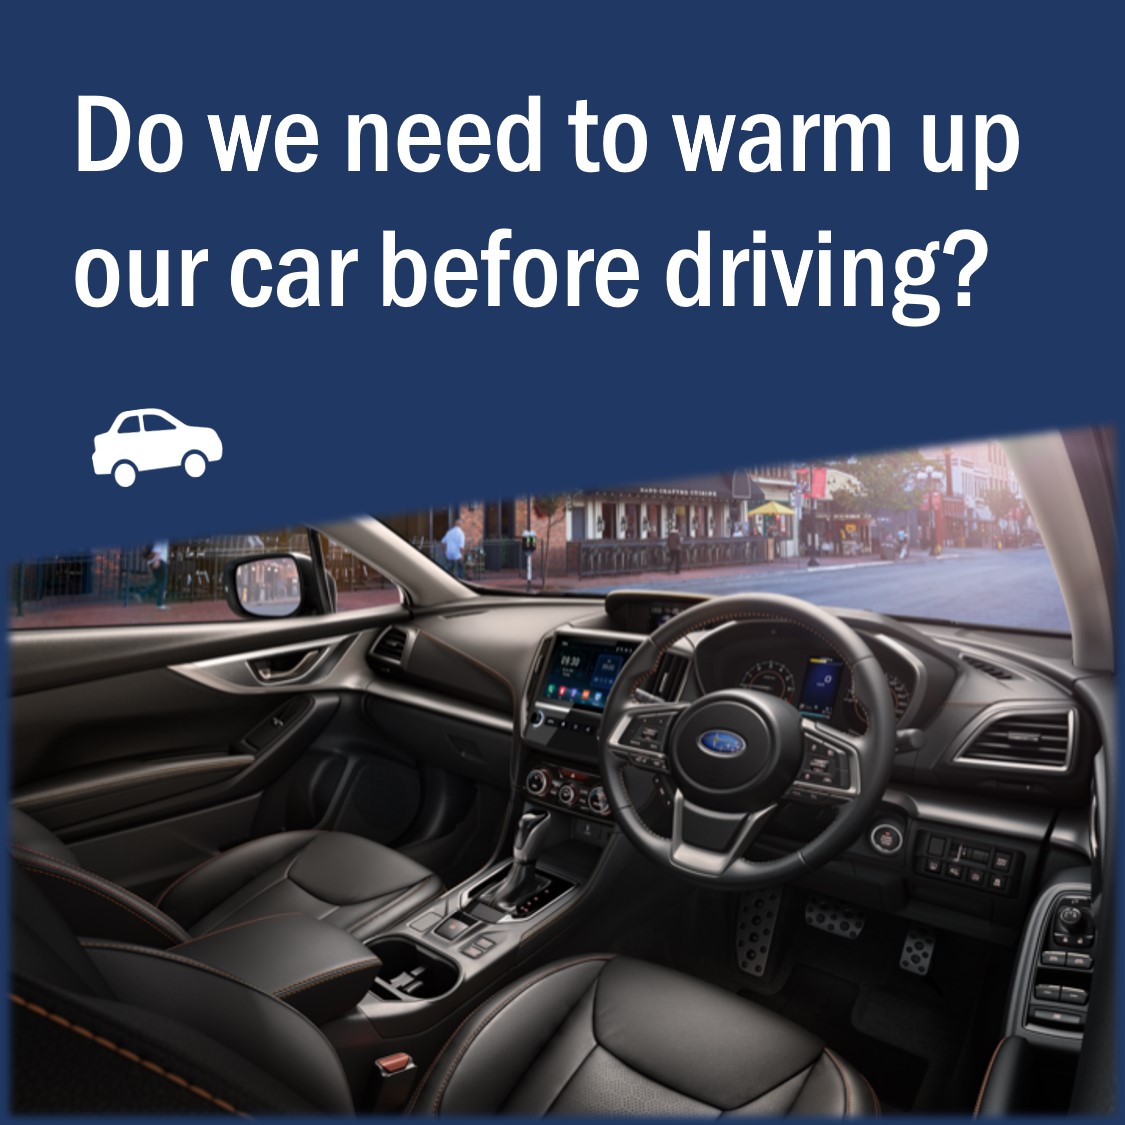 Do we need to warm up our car before driving?